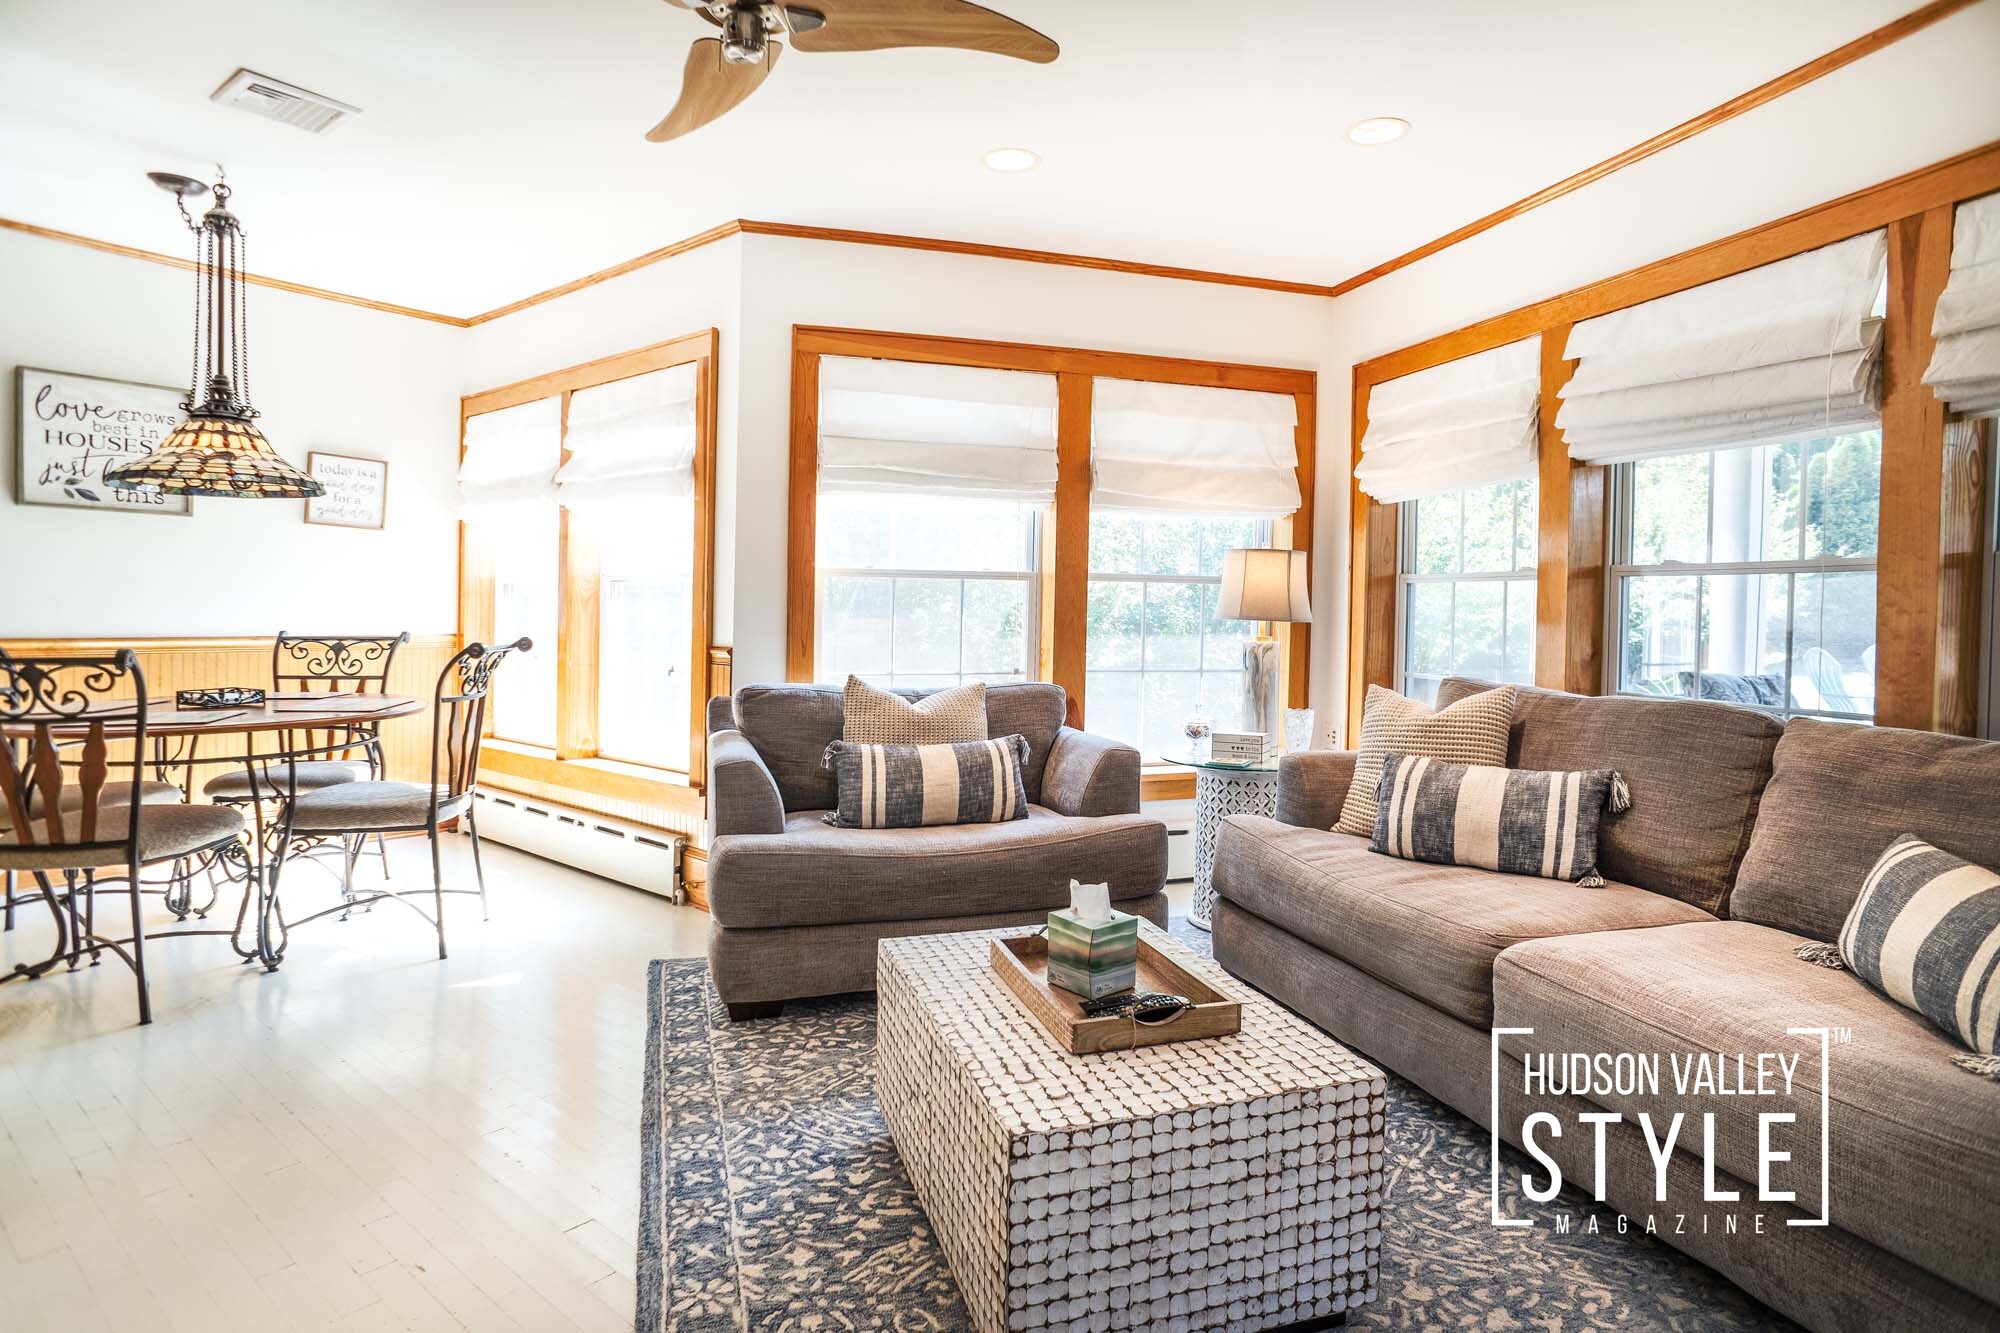 Beautiful and Cozy Hudson Valley Home for Sale just a Block away from the Hudson River and Chelsea, NY Yacht Club – Real Estate Photography by Duncan Avenue Studios